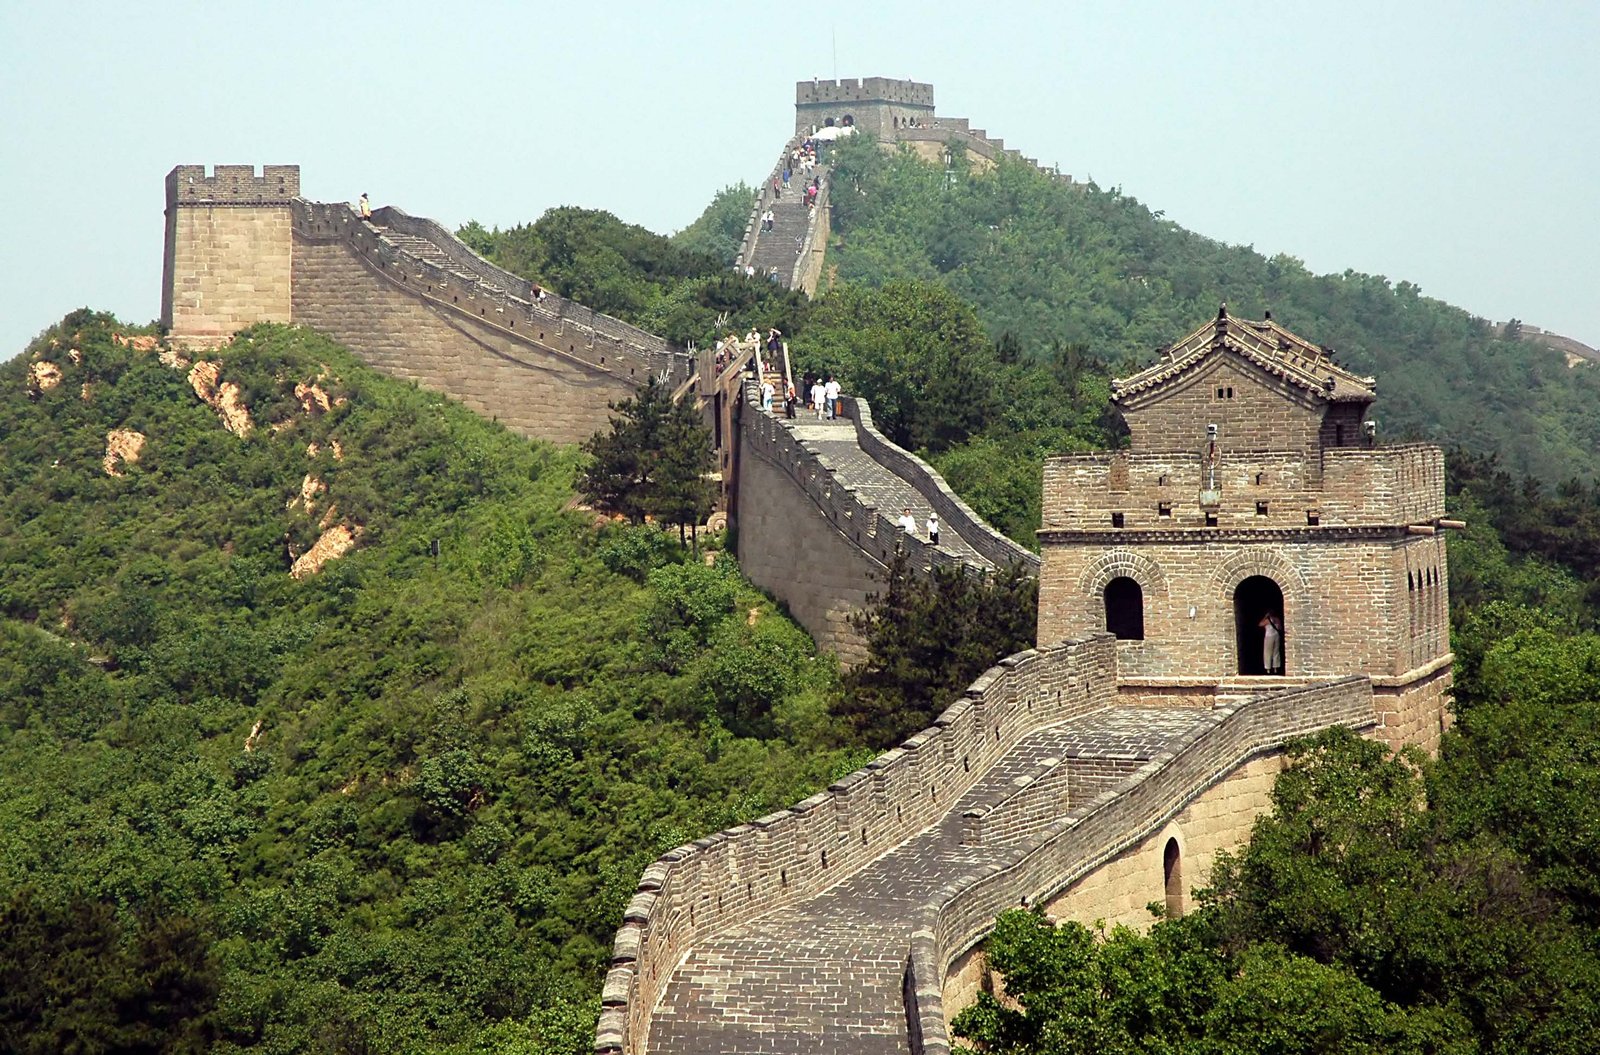 Are regulatory hurdles in China as massive as its Great Wall?